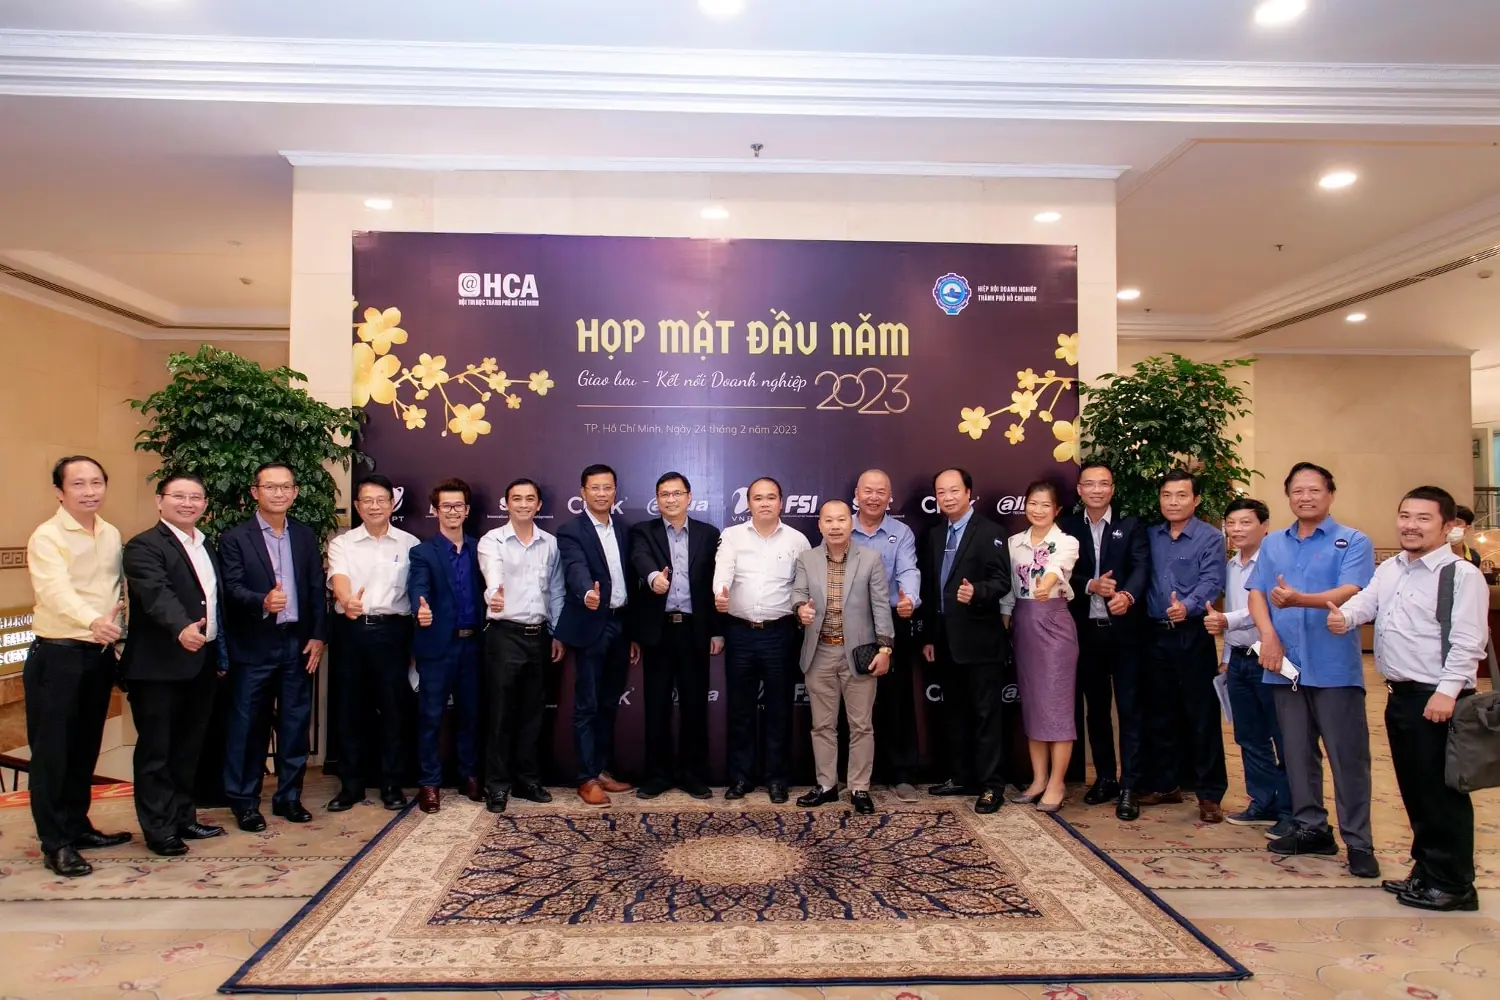 Ho Chi Minh ICT Leaders meet-up 2023 by HCA